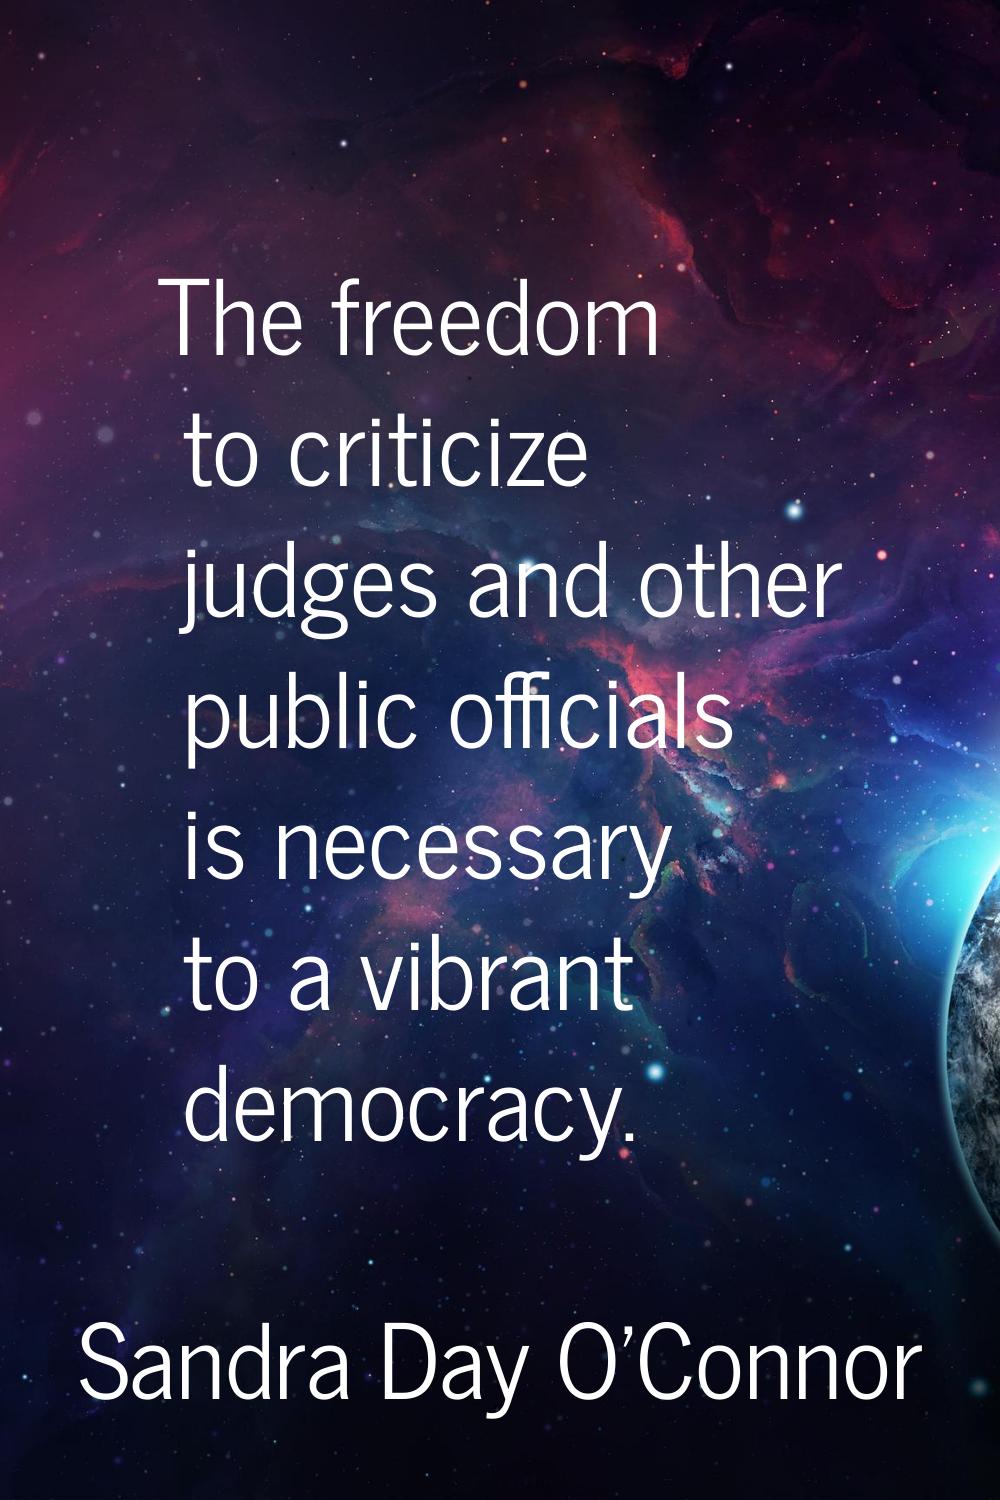 The freedom to criticize judges and other public officials is necessary to a vibrant democracy.